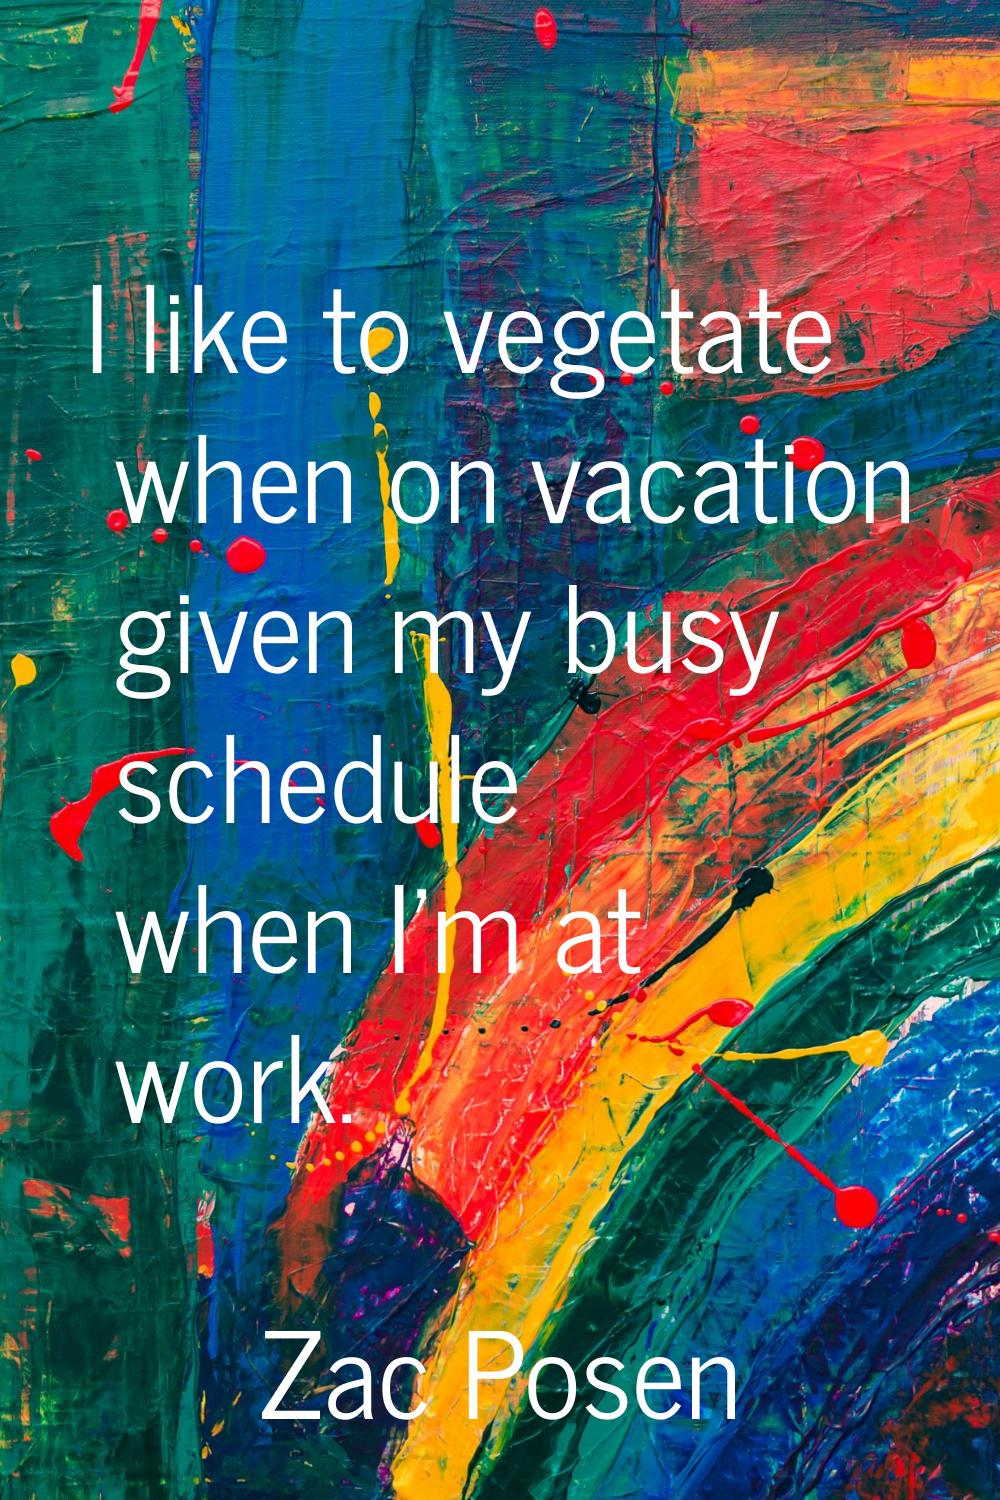 I like to vegetate when on vacation given my busy schedule when I'm at work.